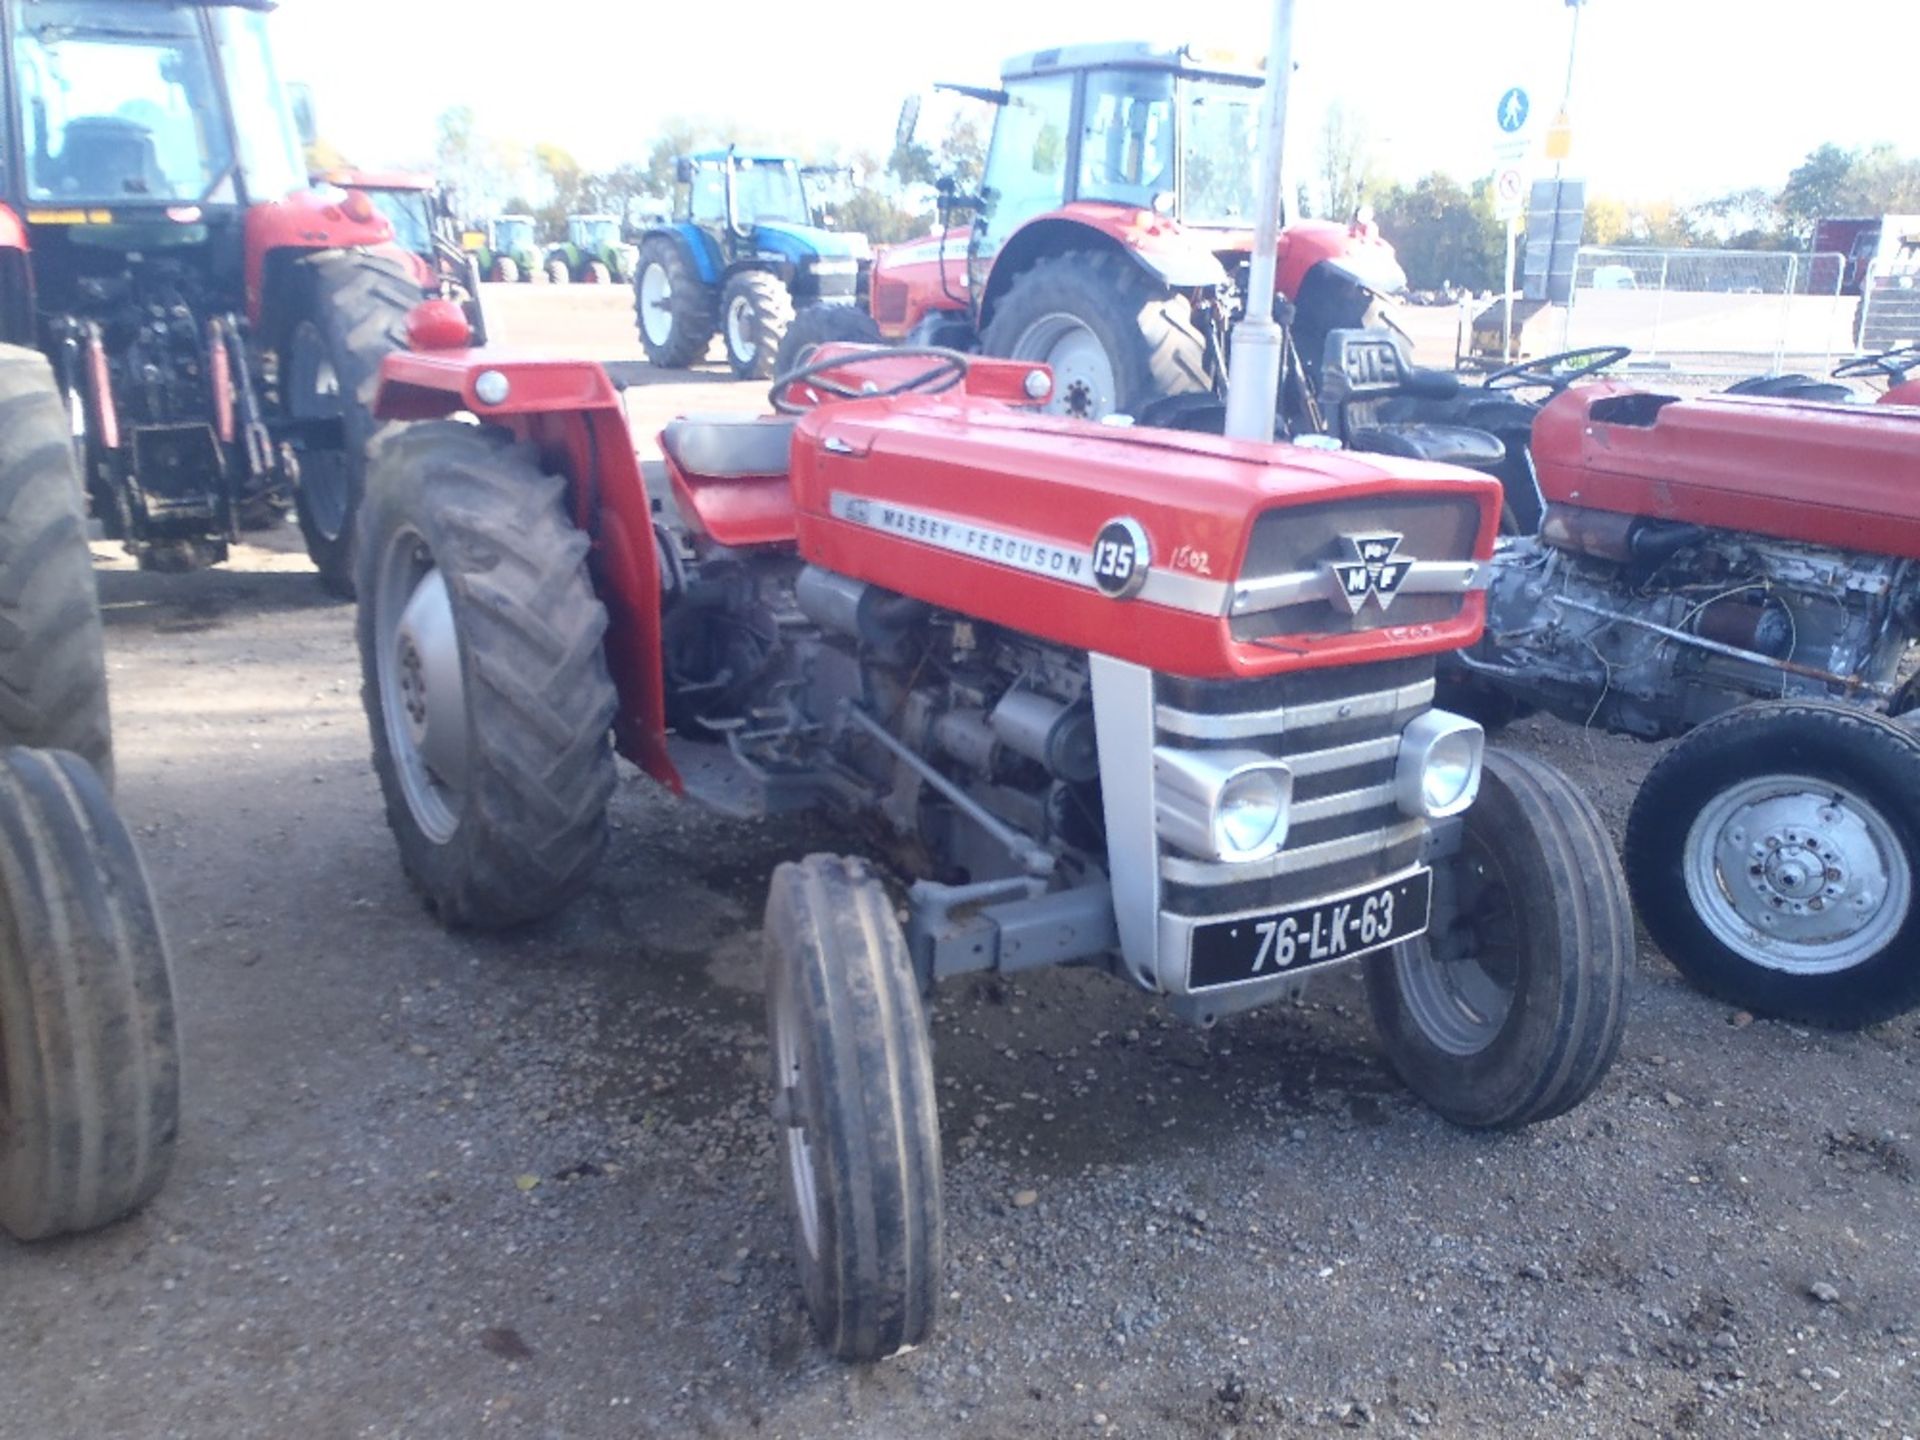 1976 Massey Ferguson 135 3 Cylinder Diesel Tractor. Goodyear Tyres, Long PTO, Cat 2 Lift Arms & Pick - Image 2 of 7